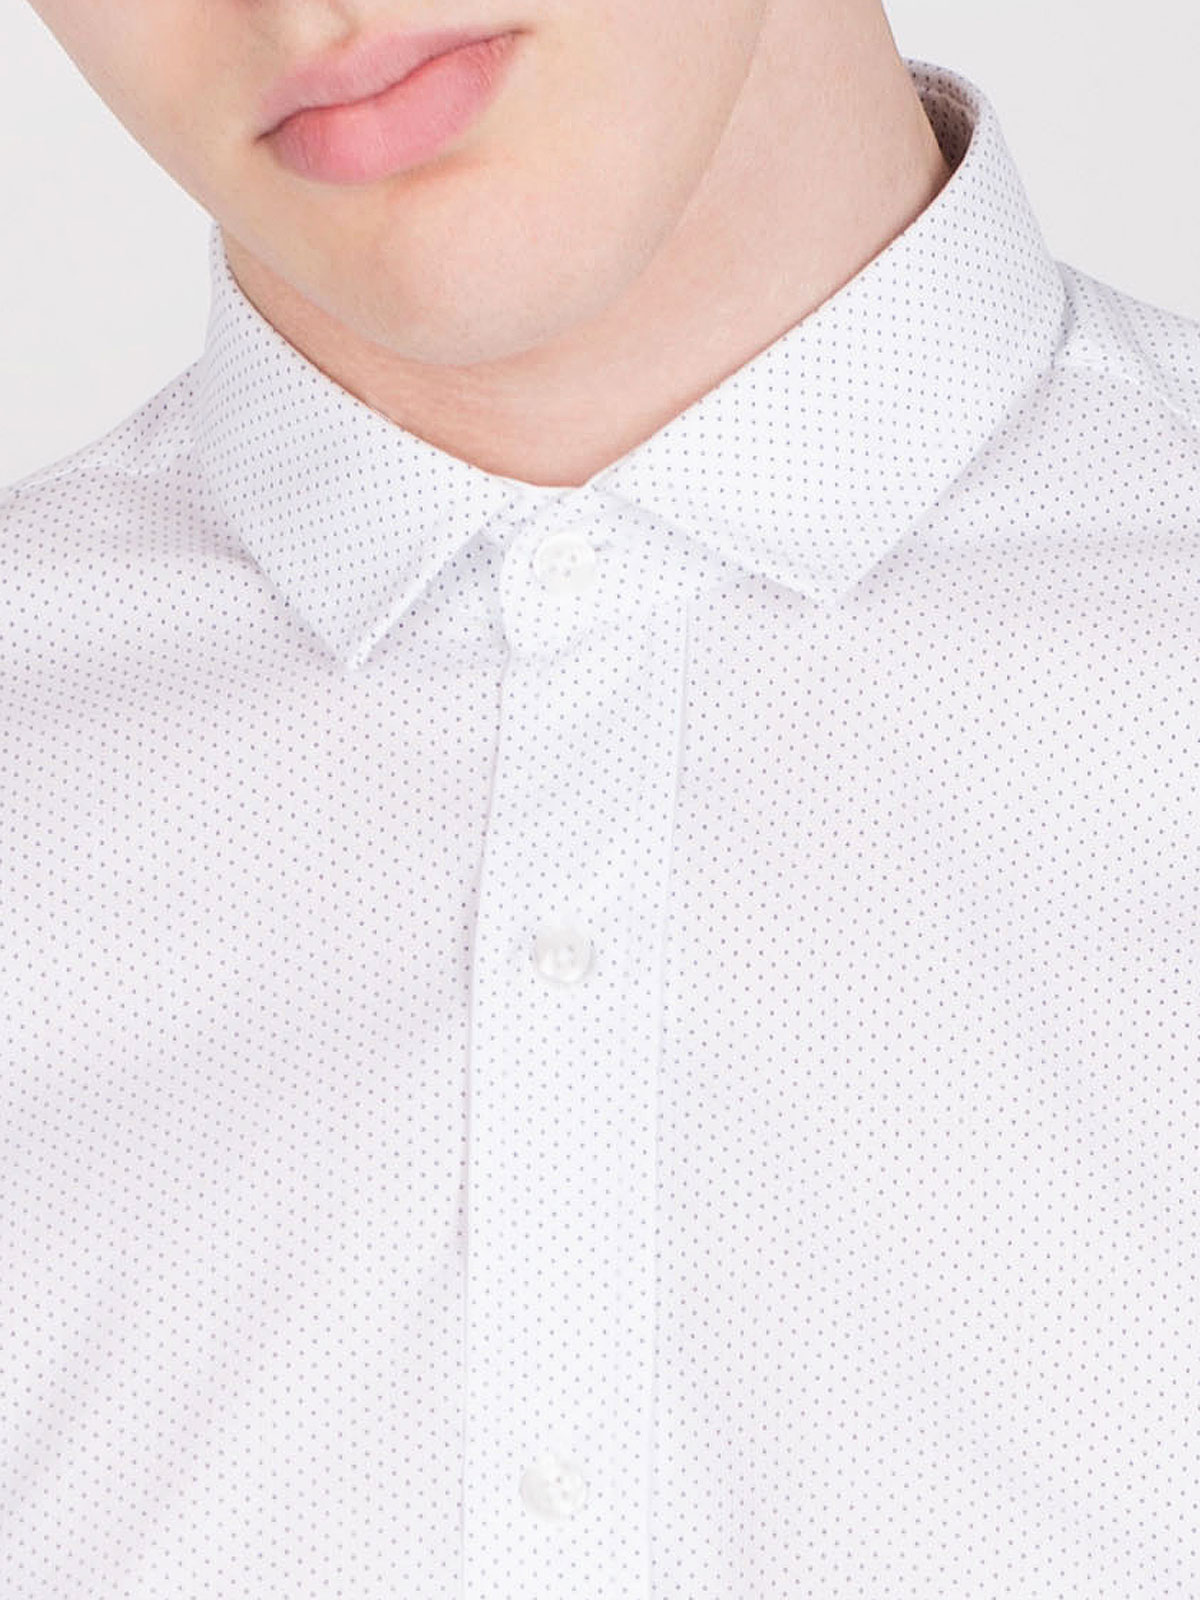 White shirt with black dots - 21460 € 21.93 img2